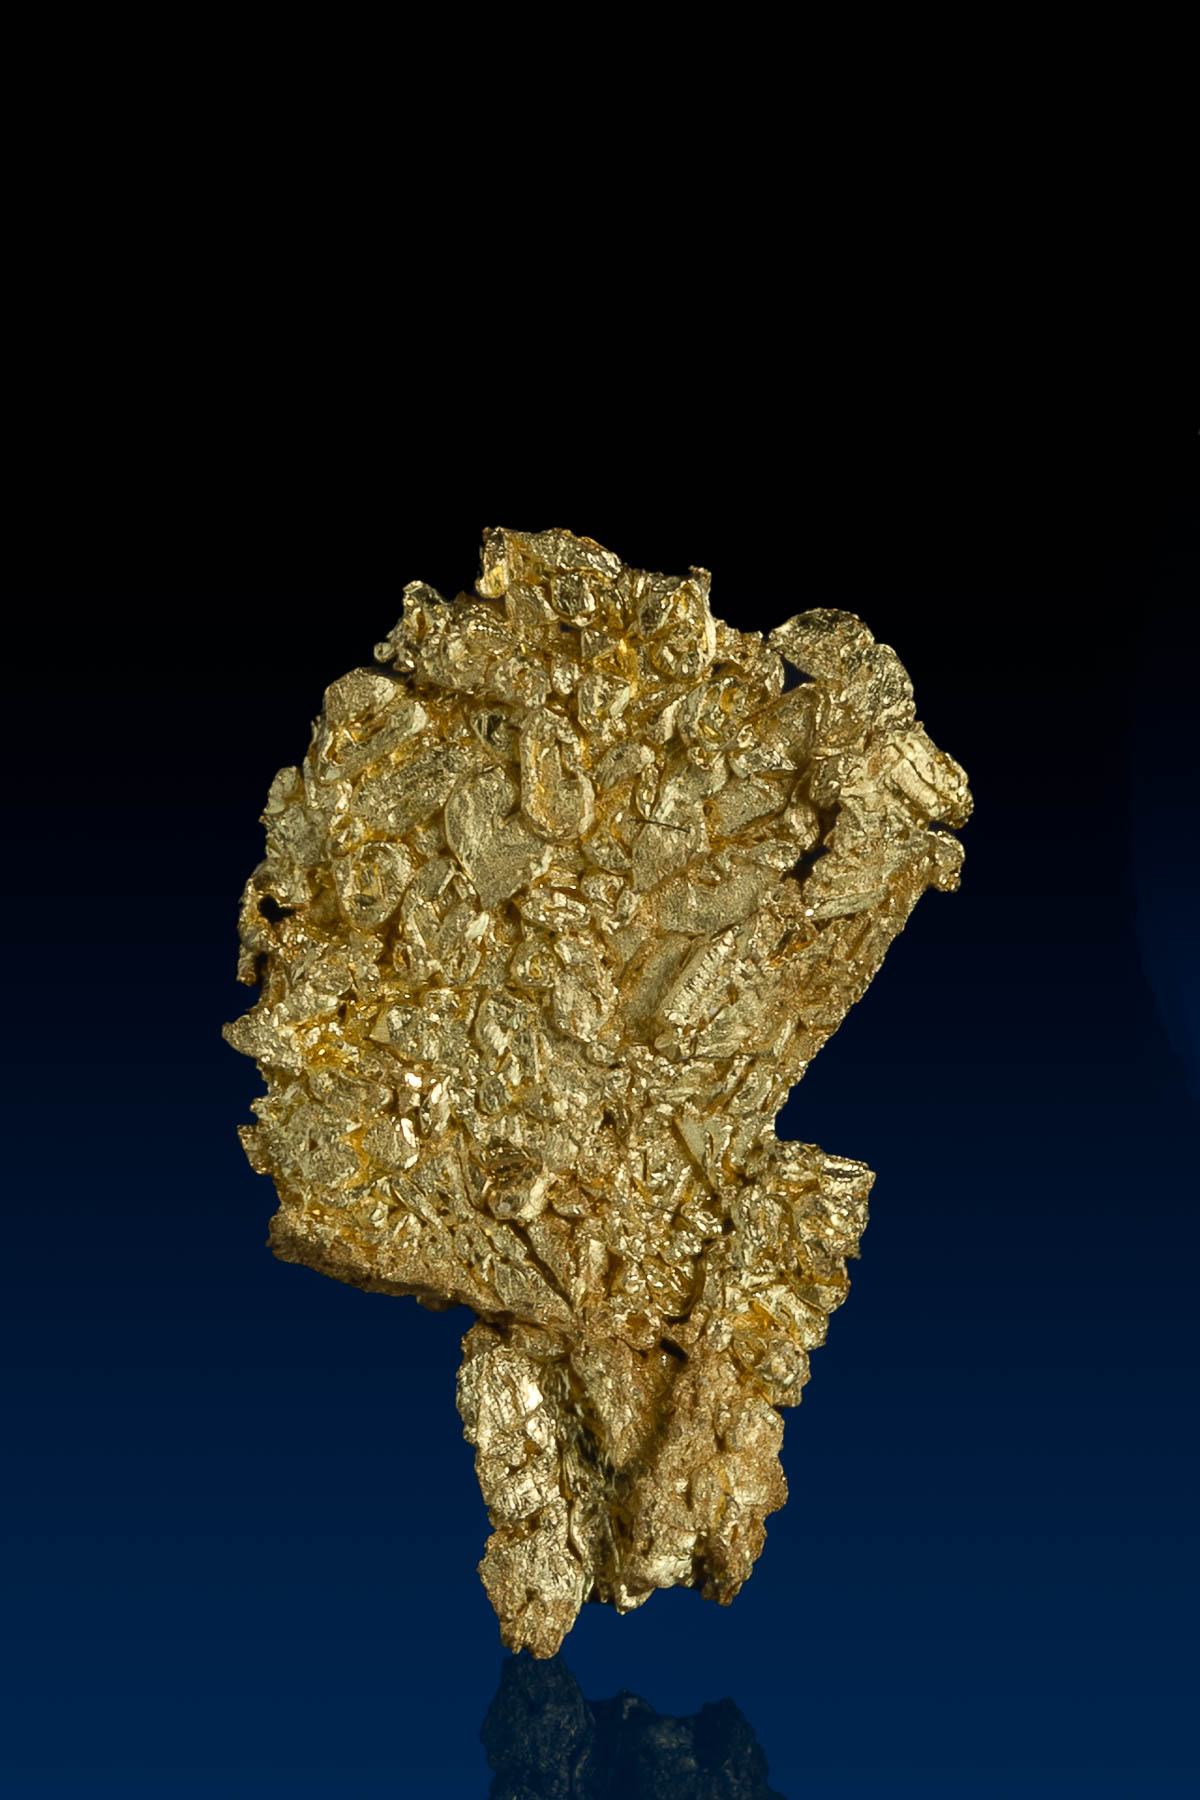 Beautiful Buttery Gold Crystal Specimen from Breckenridge, CO